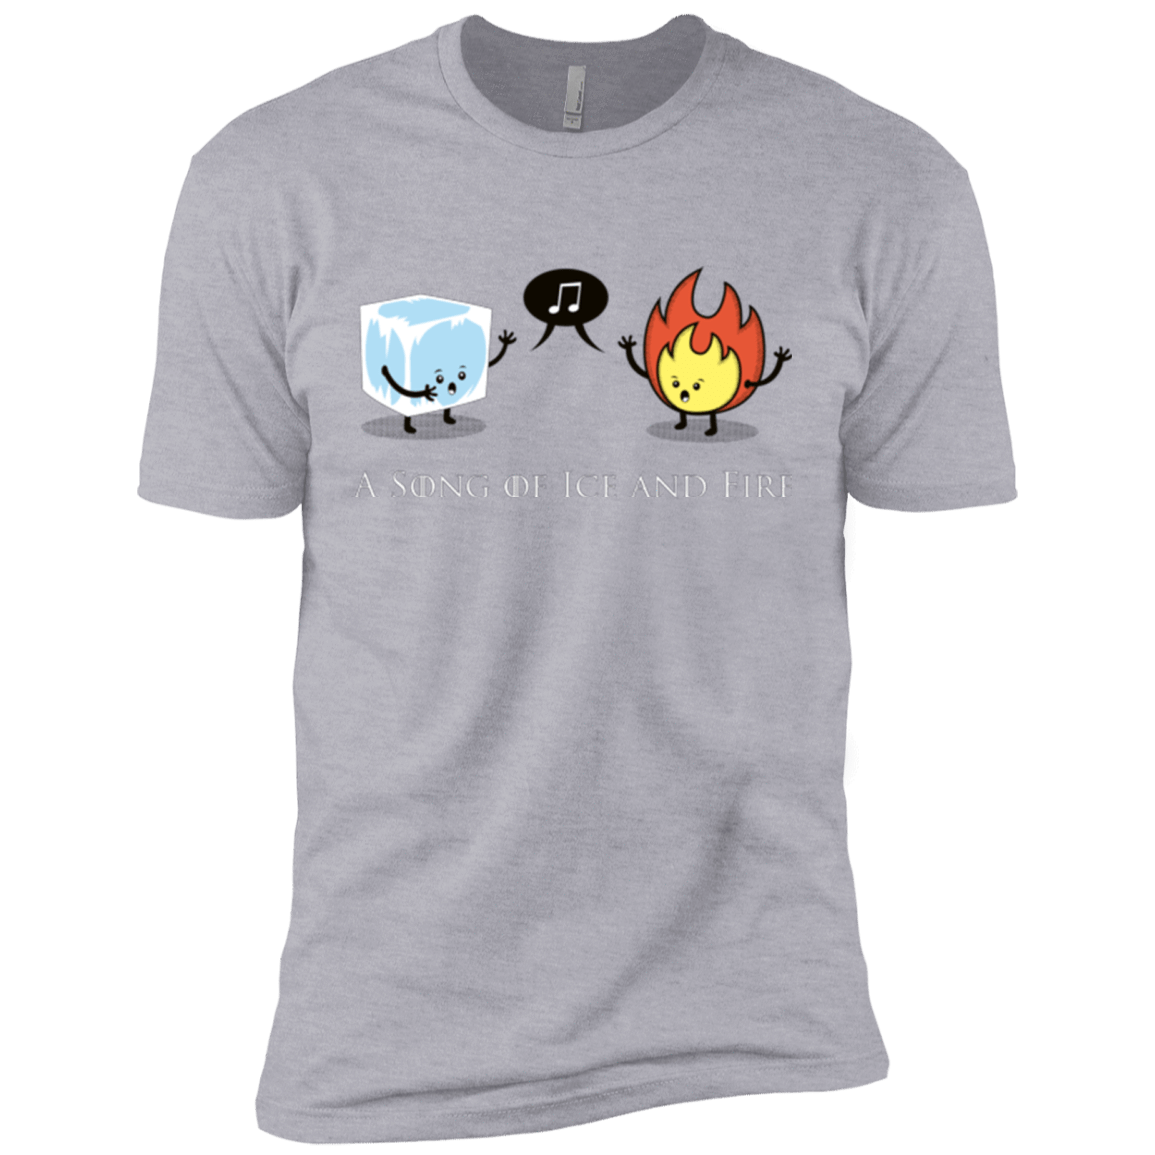 T-Shirts Heather Grey / X-Small A Song of Ice and Fire Men's Premium T-Shirt